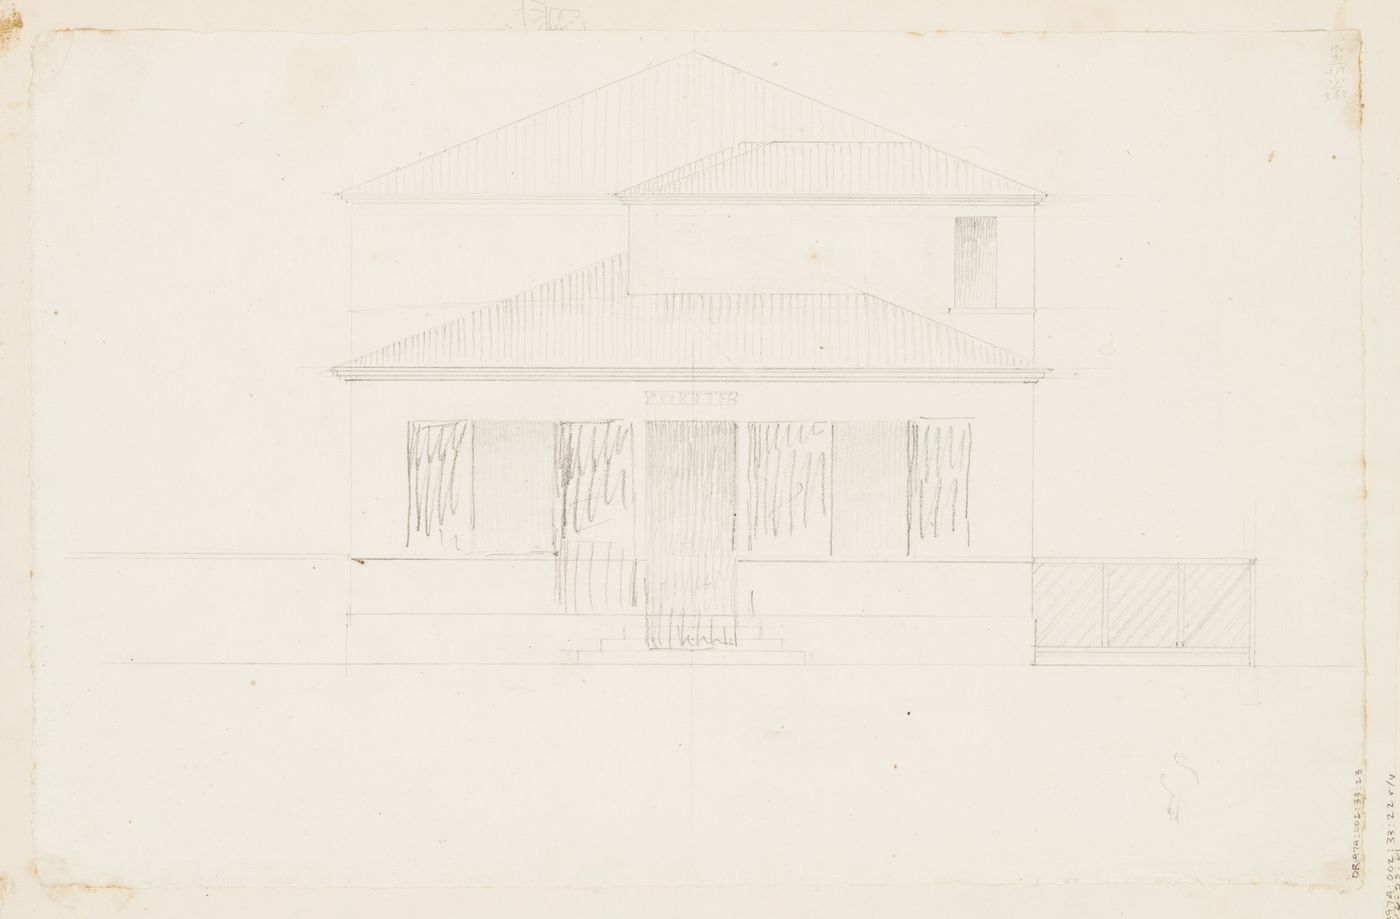 Project for housing for M. Busche: Elevation for the porter's residence